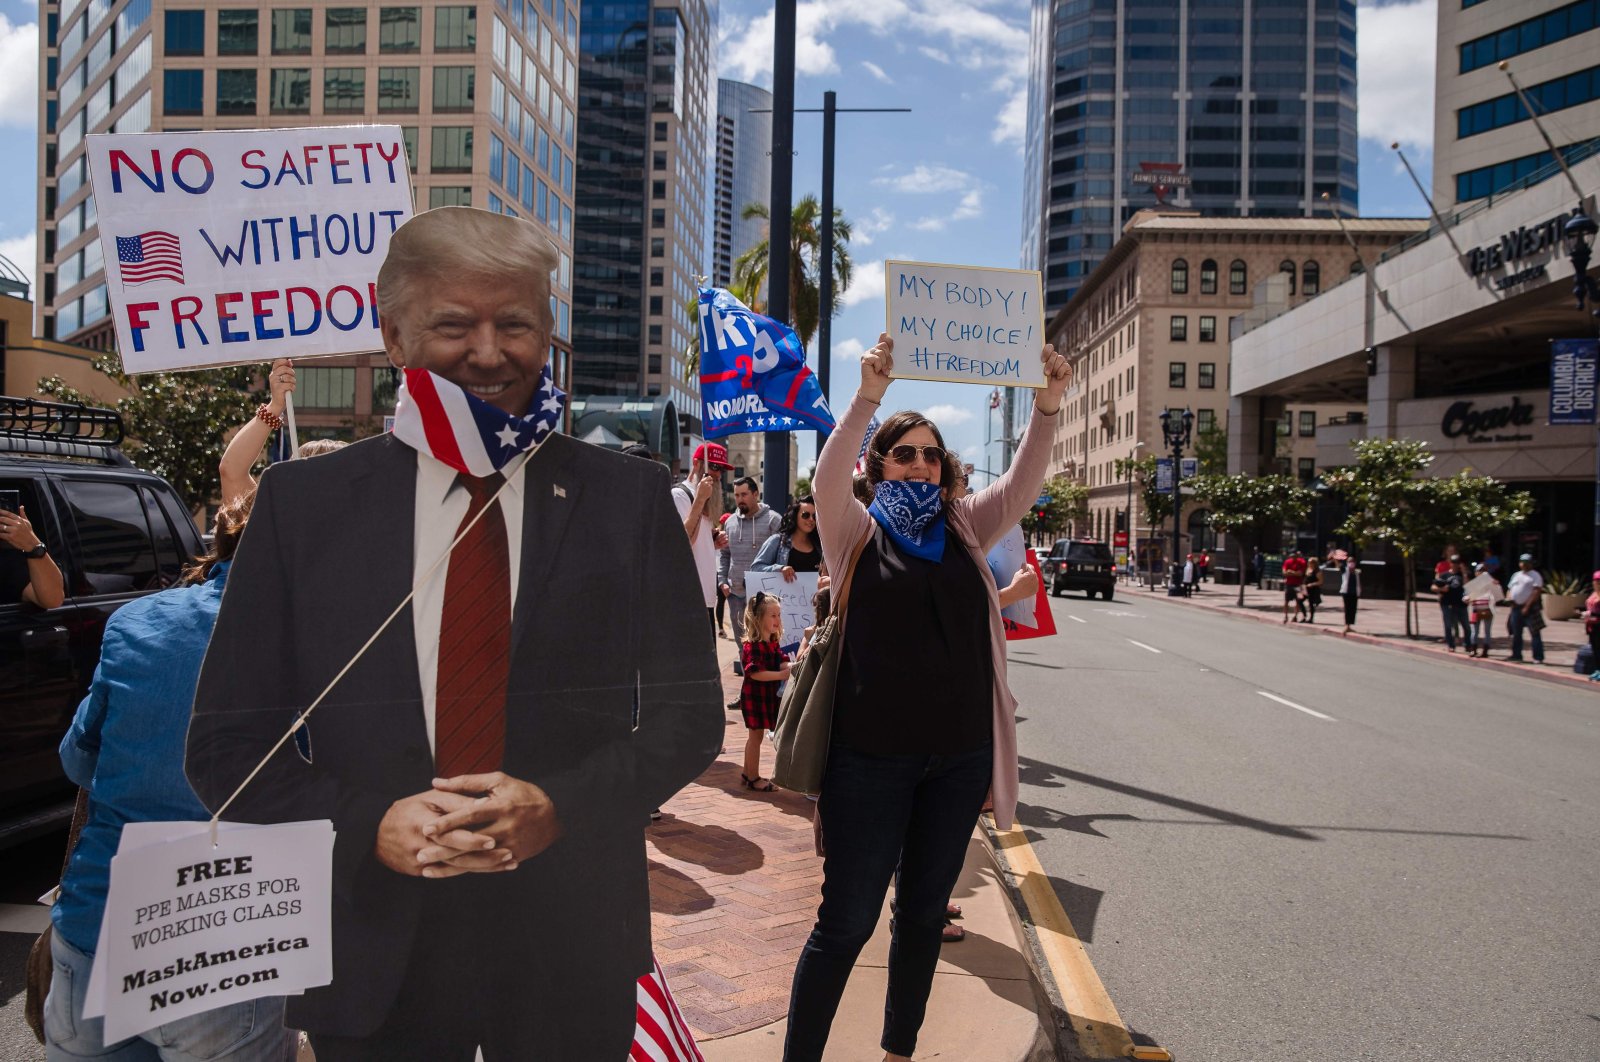 A Trump cutout with a US flag around its neck is seen next to protesters rallying in downtown San Diego against California's stay at home order to prevent the spread of the novel coronavirus, which causes COVID-19, on April 18, 2020. (AFP Photo)